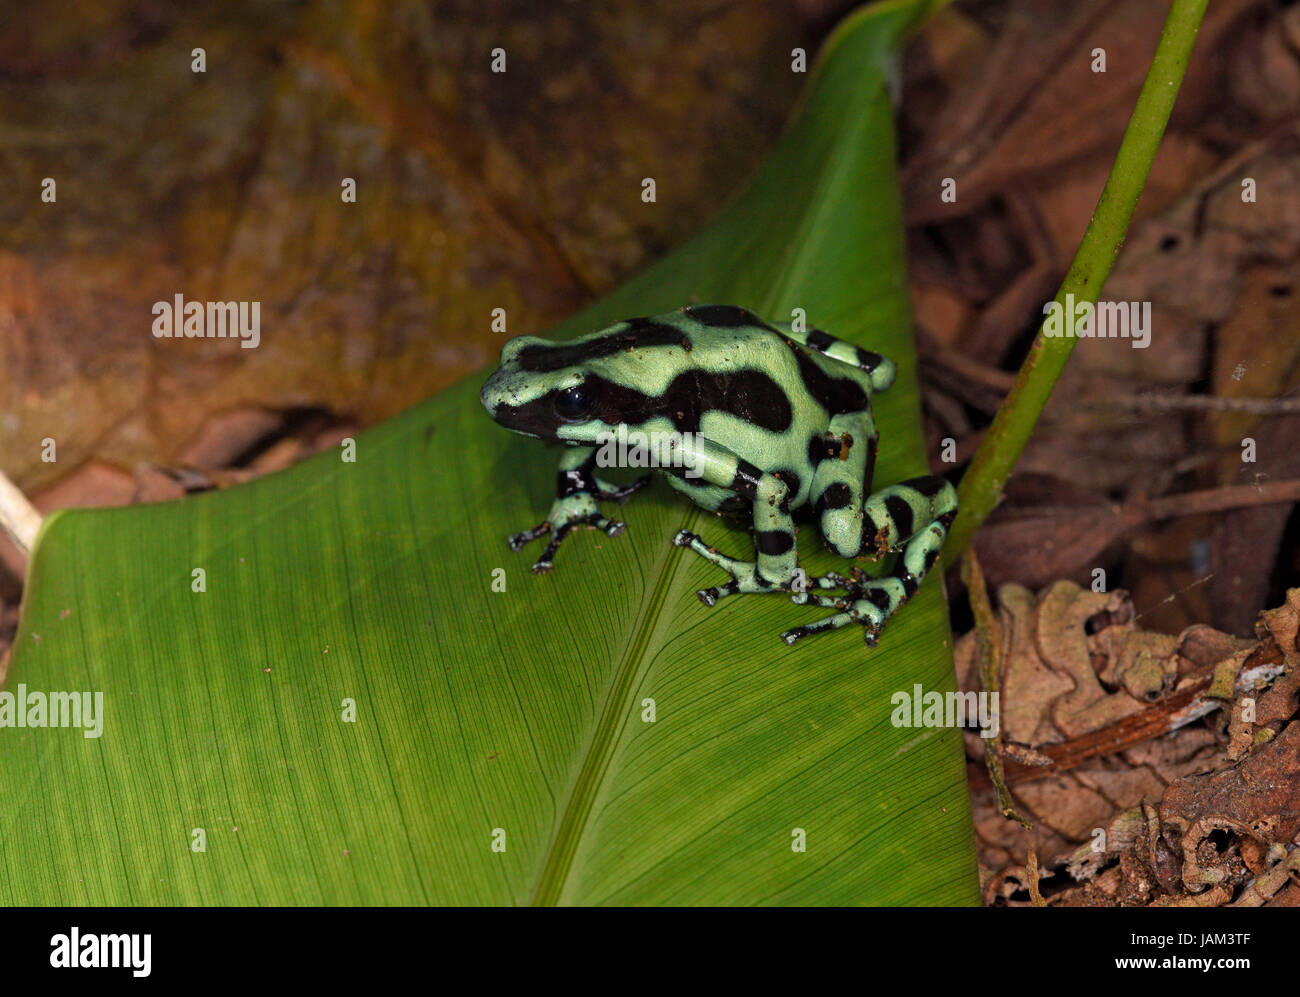 Green Poison Arrow Frog (Dendrobates auratus) sitting on fallen leaf on the ground, Costa Rica, March Stock Photo